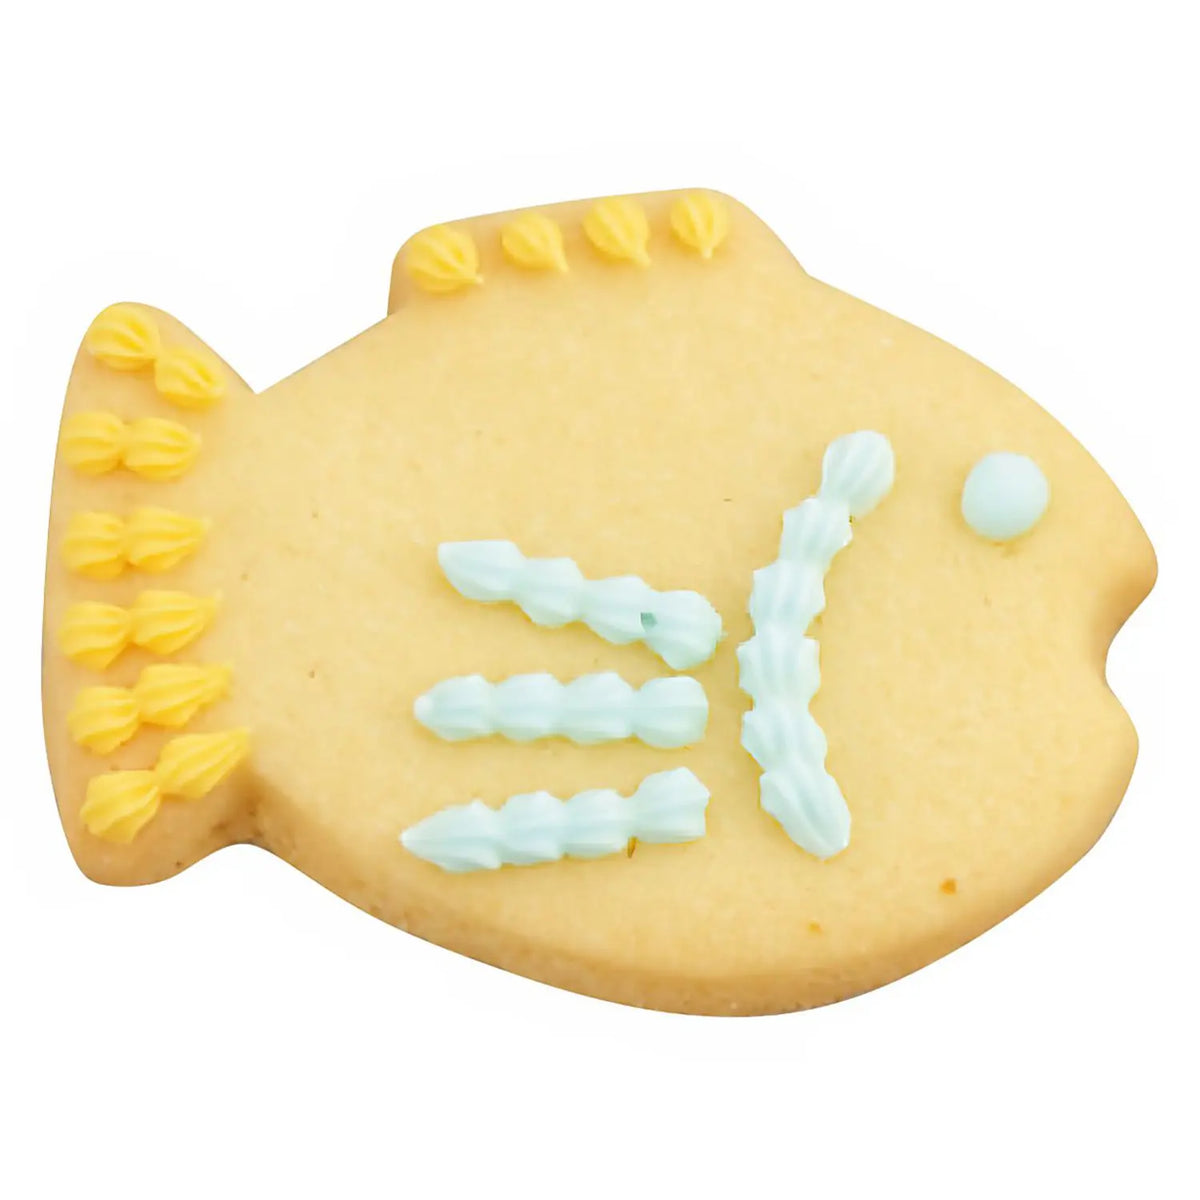 TIGERCROWN Cake Land Stainless Steel Cookie Cutter Fish